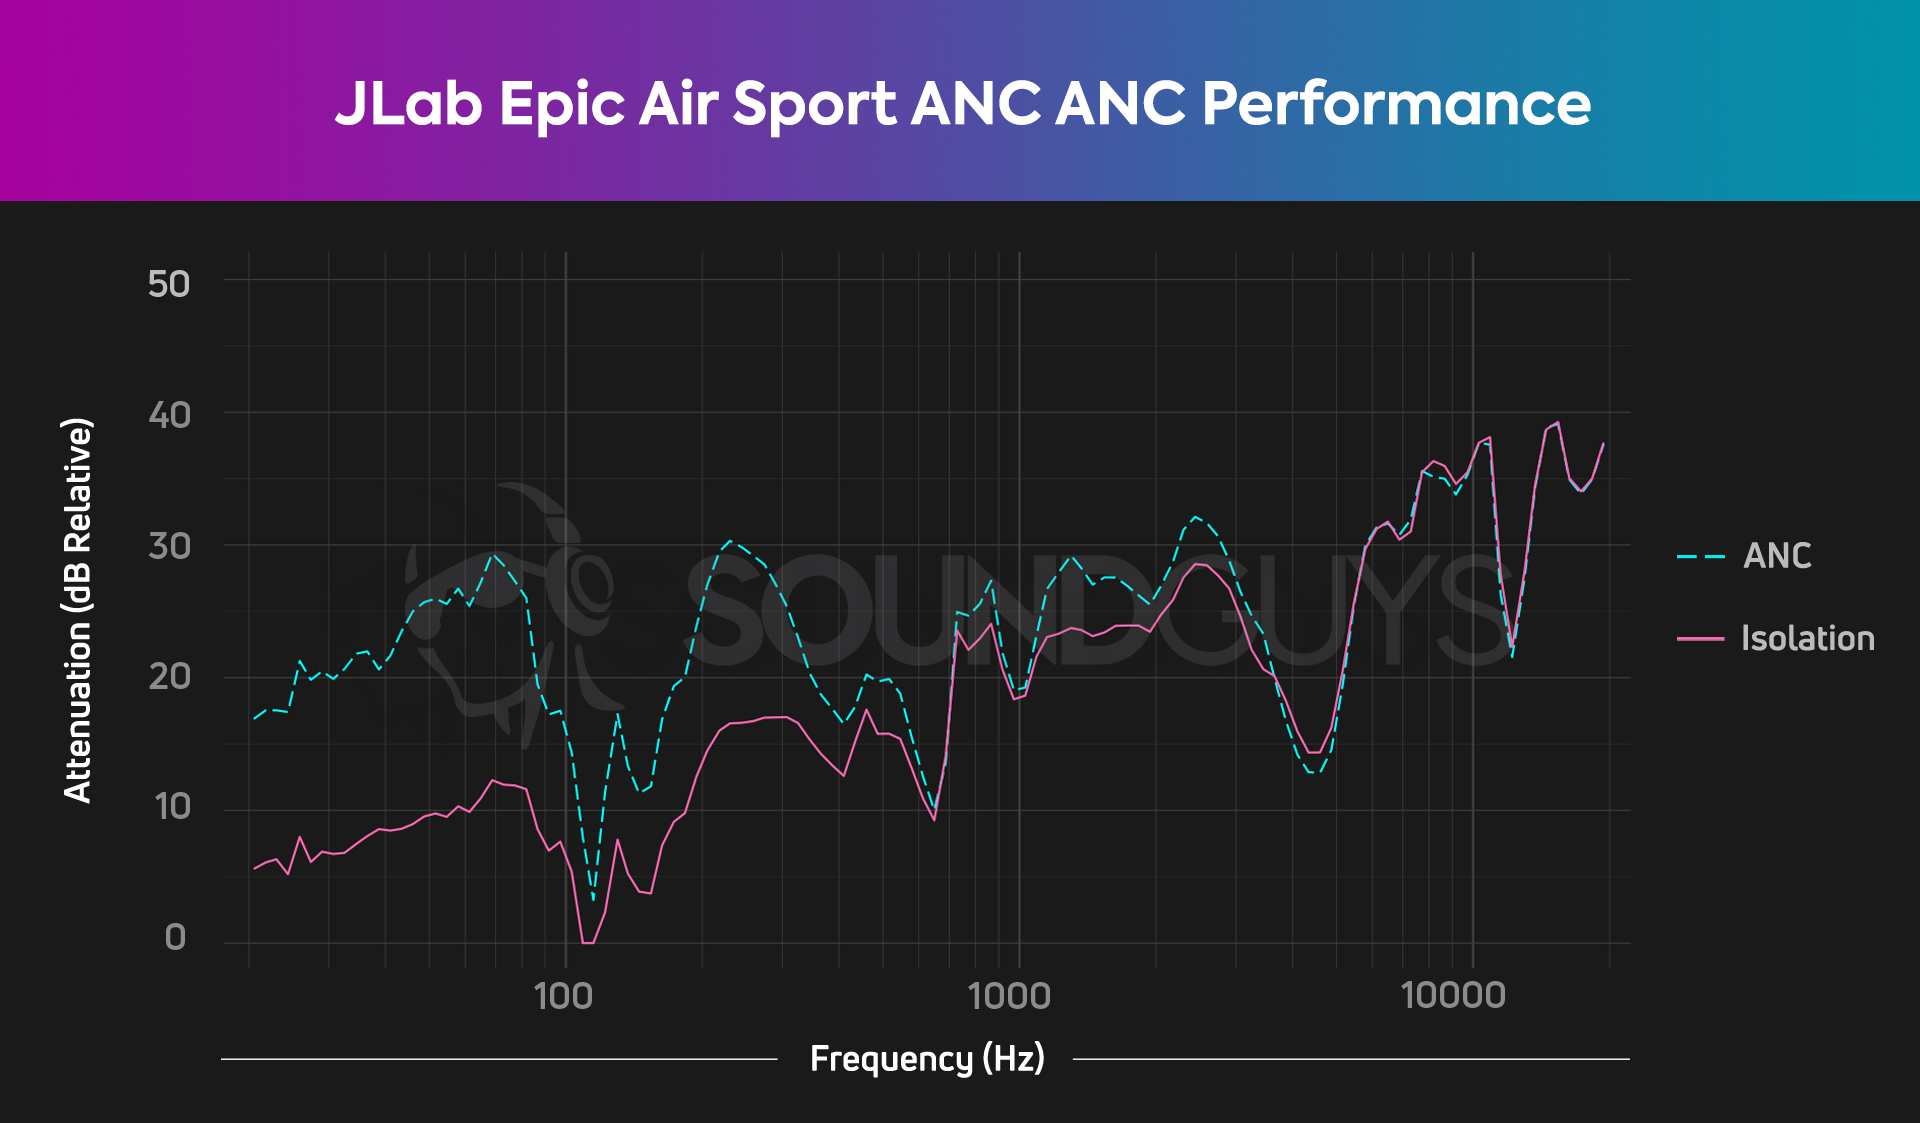 The ANC chart for the JLab Epic Air Sport ANC.